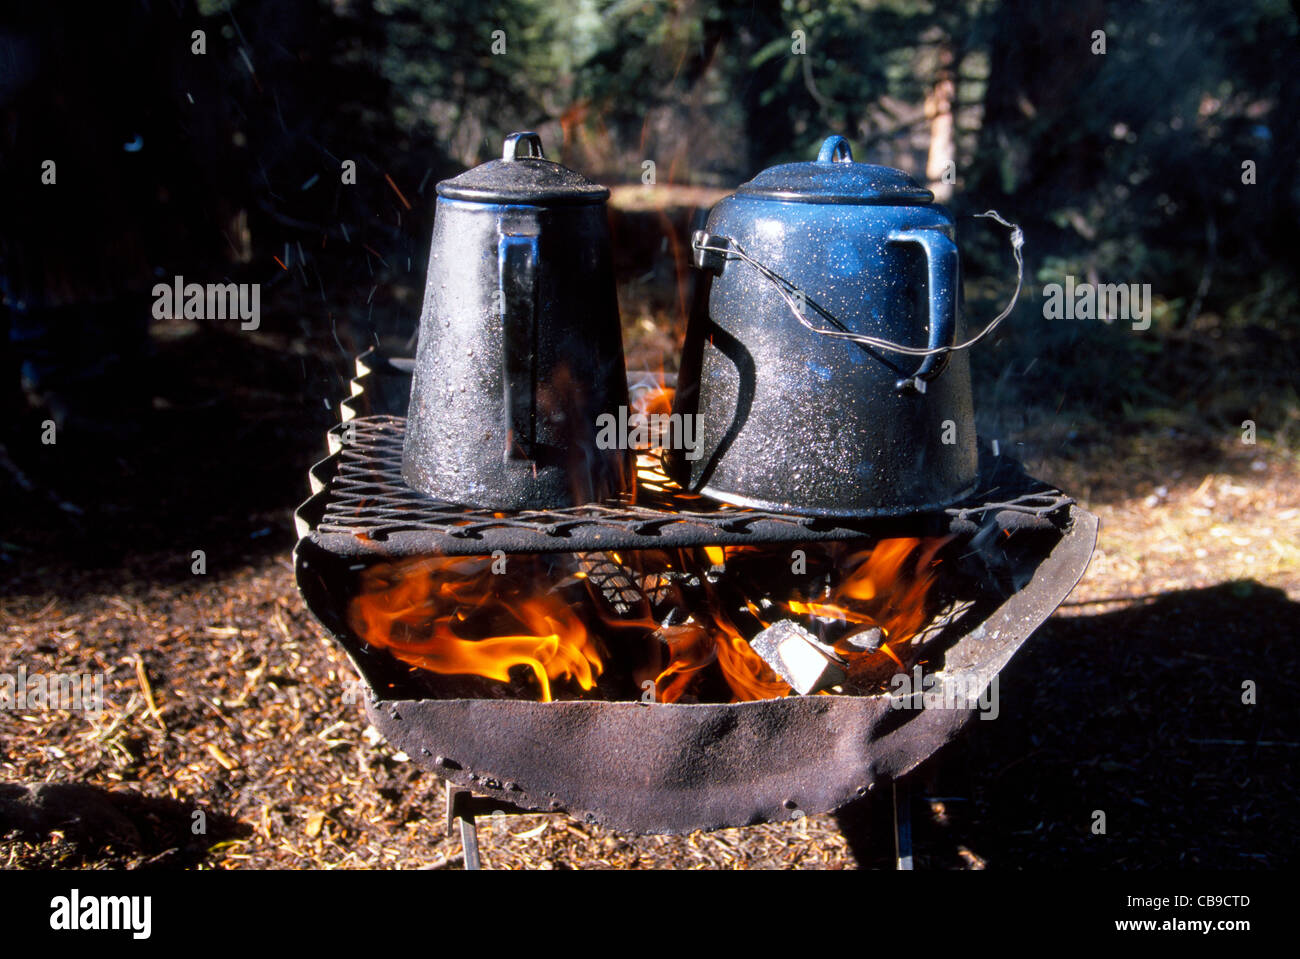 Cowboy coffee is being brewed in enamelware pots that are heated over a  wood fire during a rest stop on a horseback trail ride in Alberta, Canada  Stock Photo - Alamy